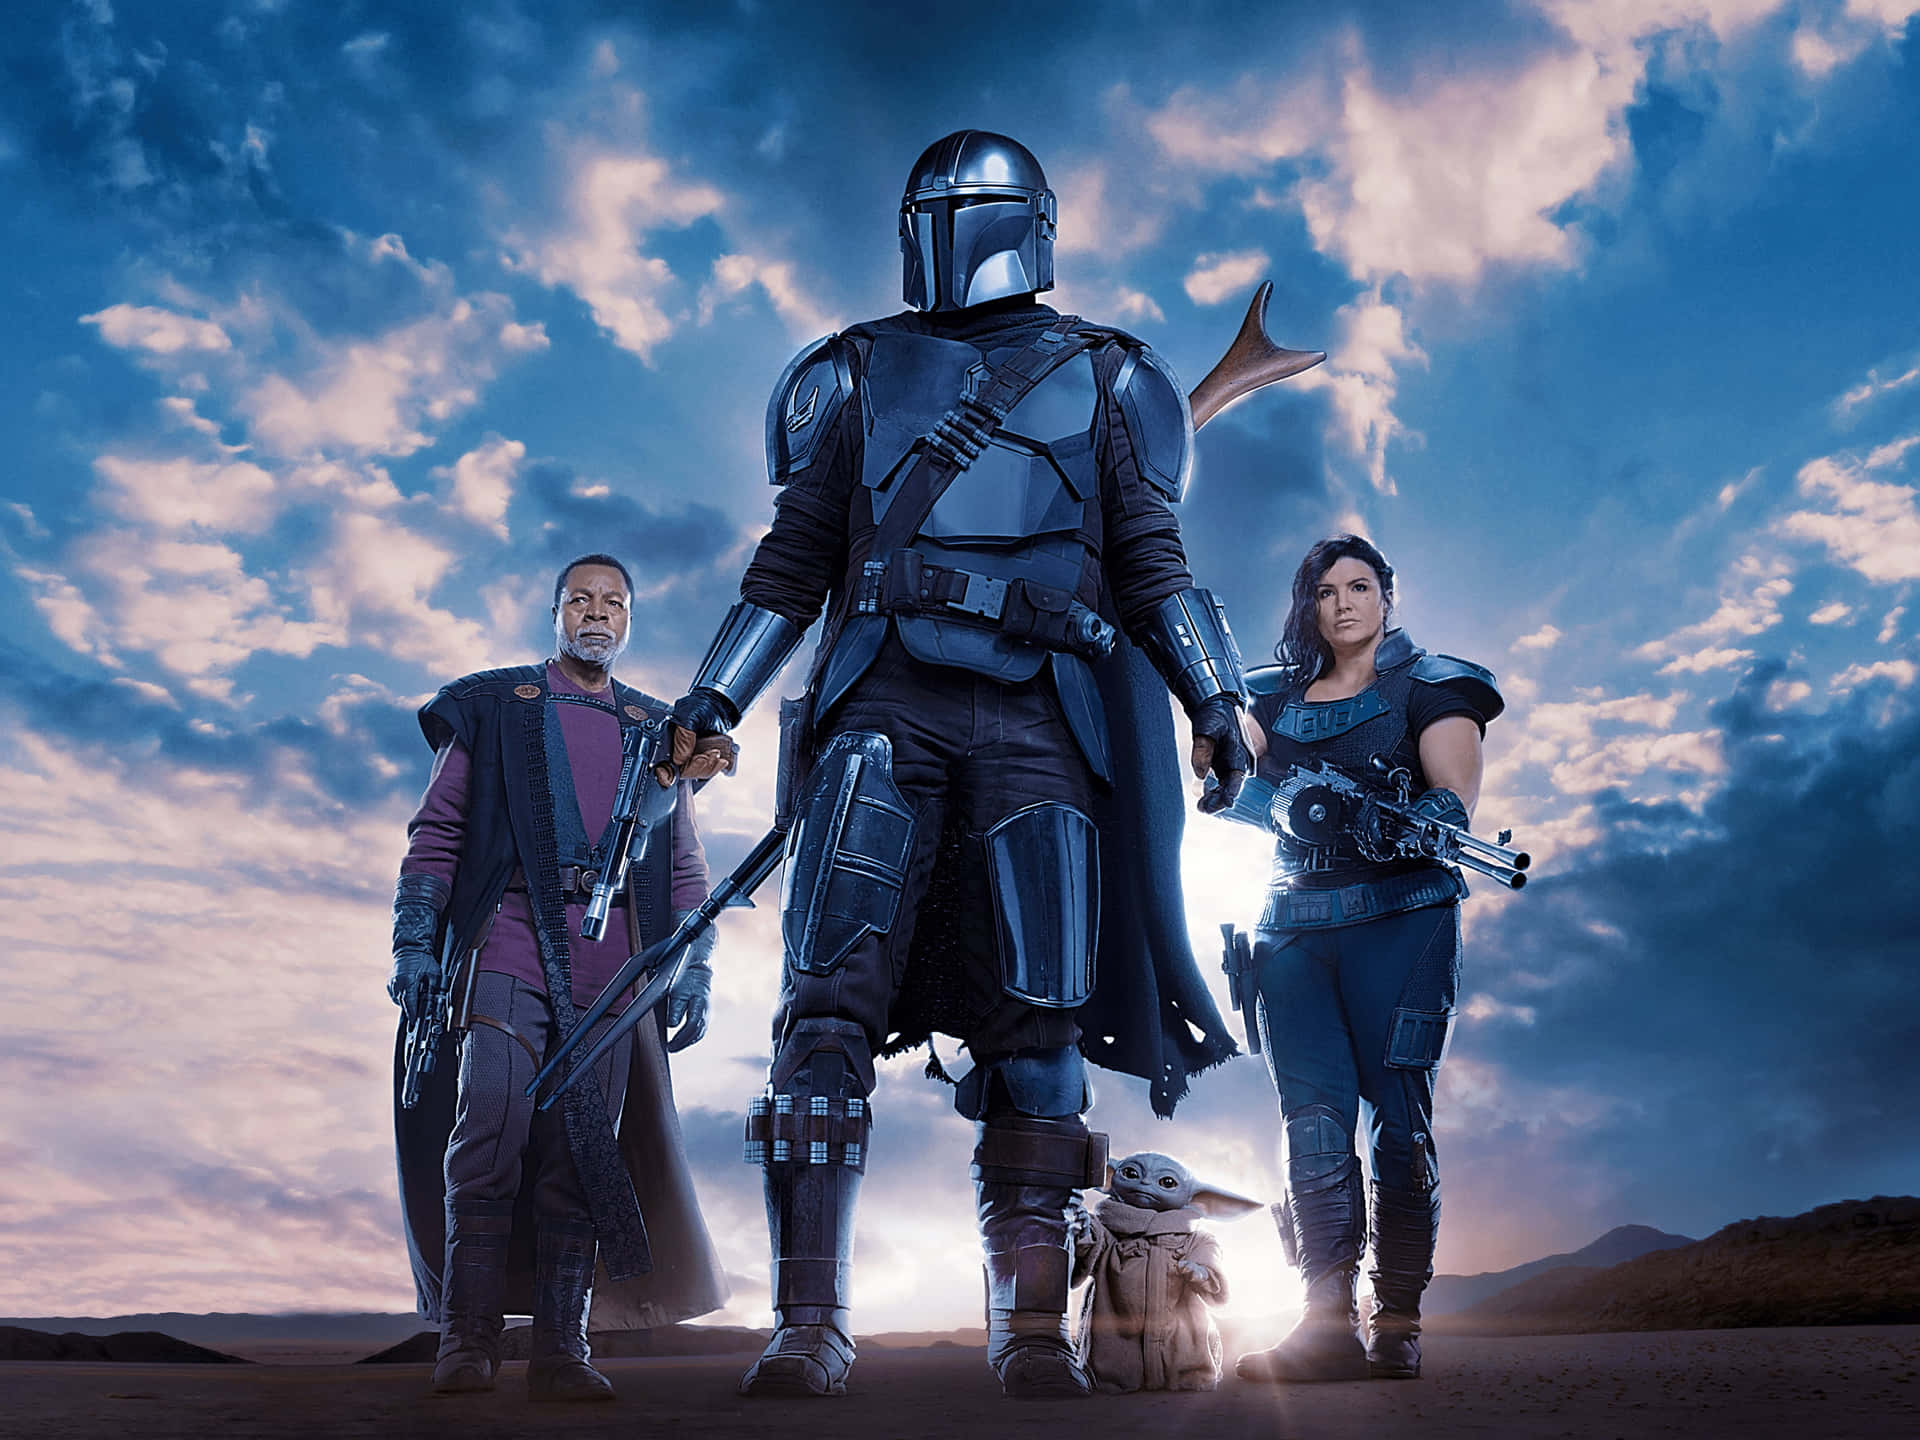 Caption: The Mandalorian walks into action with the Child by his side in a remote desert landscape.